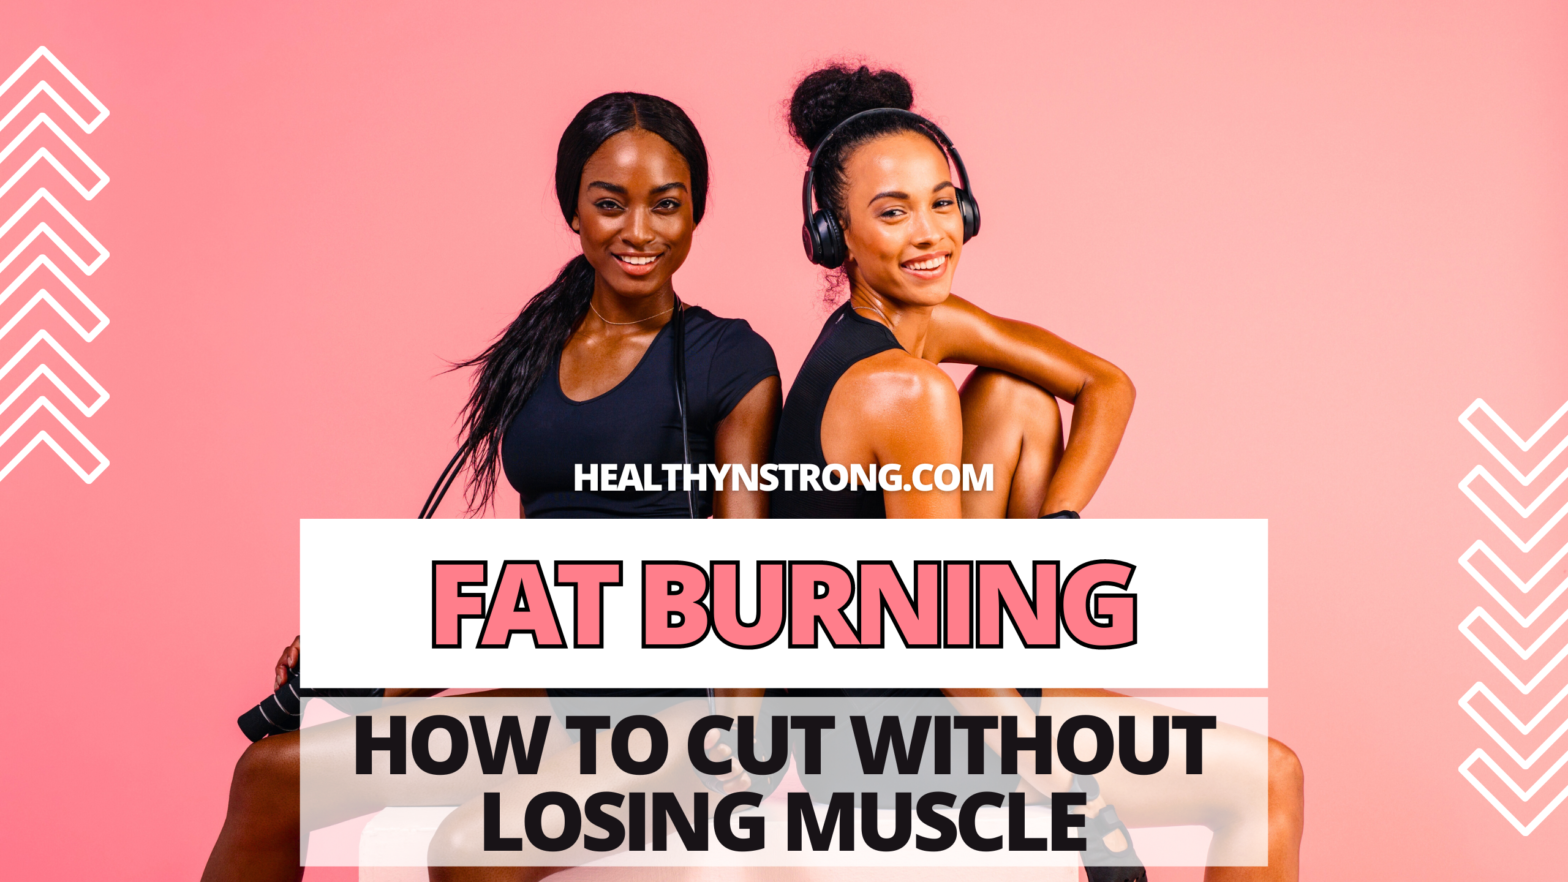 How to Cut Without Losing Muscle